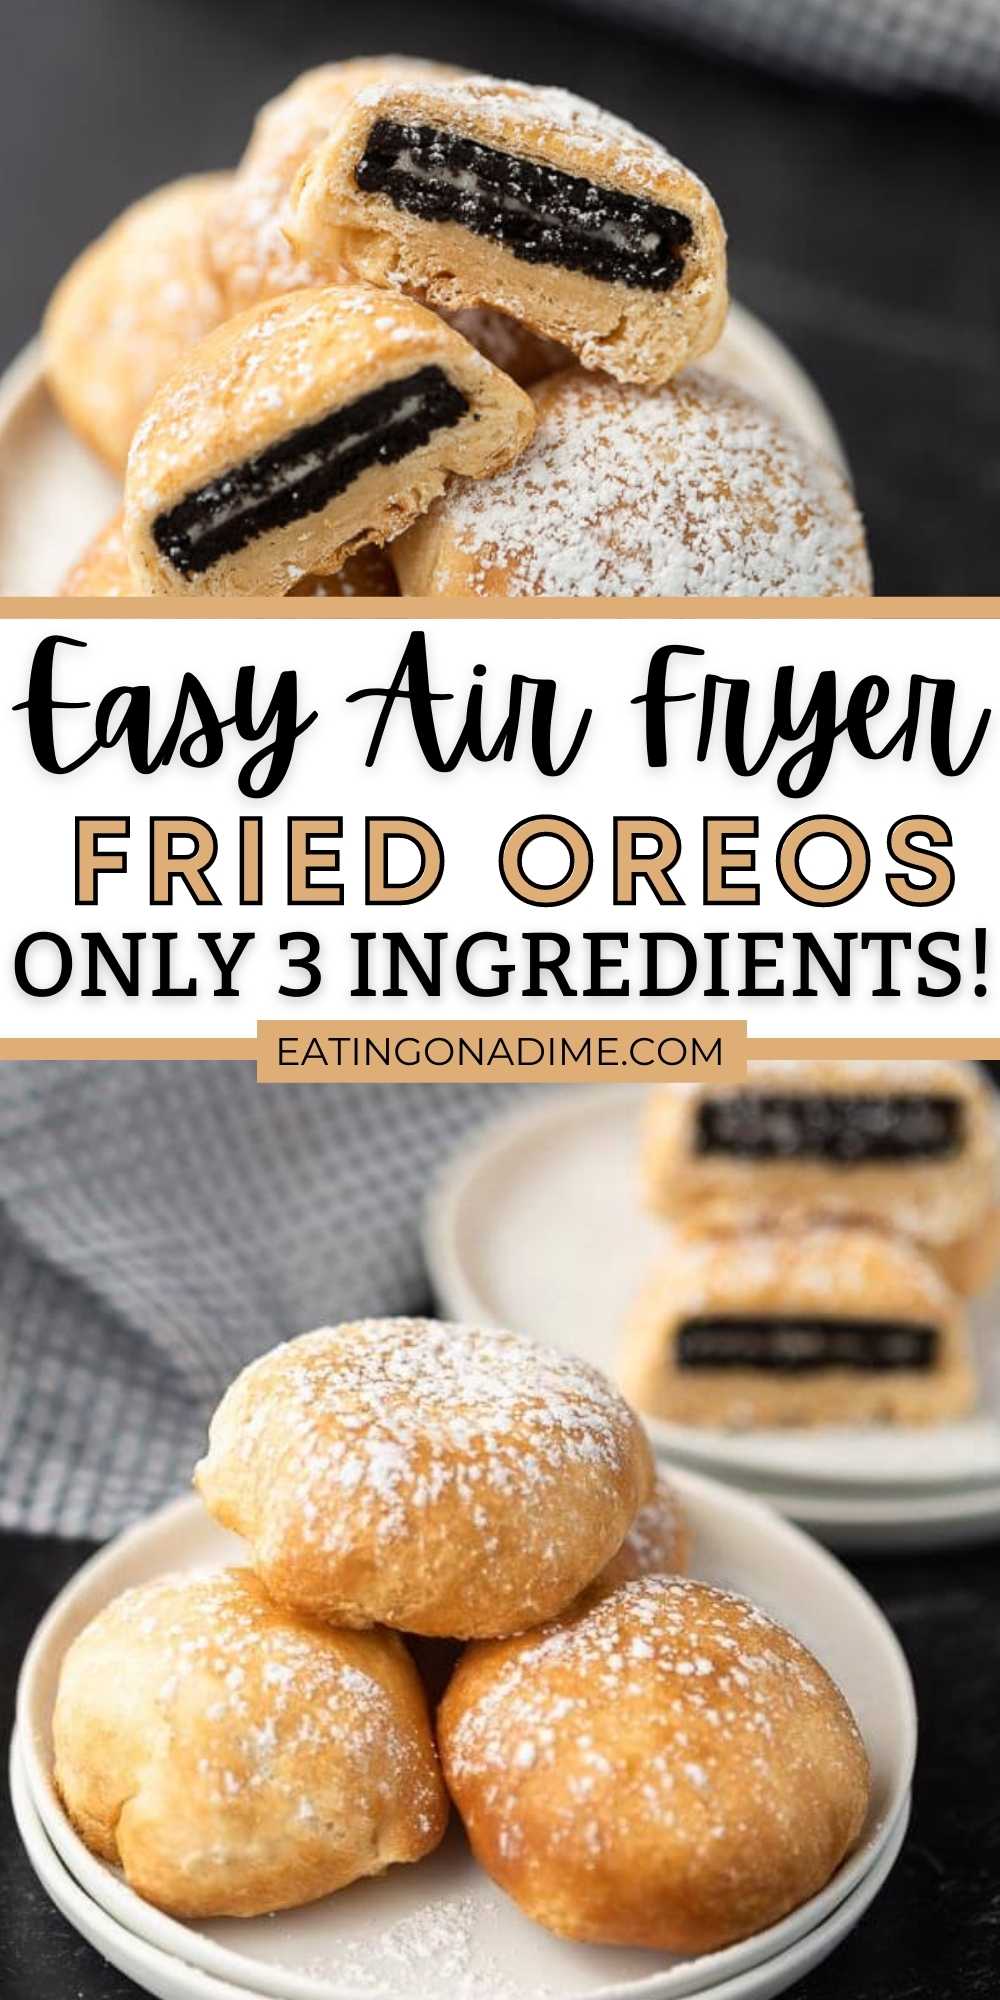 This is the easiest air fryer Oreo recipe with just 3 ingredients.  You will love these easy to make air fryer Oreos.  Make these simple air fryer Oreos with Crescent rolls in just minutes!  Everyone will love them! #eatingonadime #airfryerrecipes #oreorecipes 
